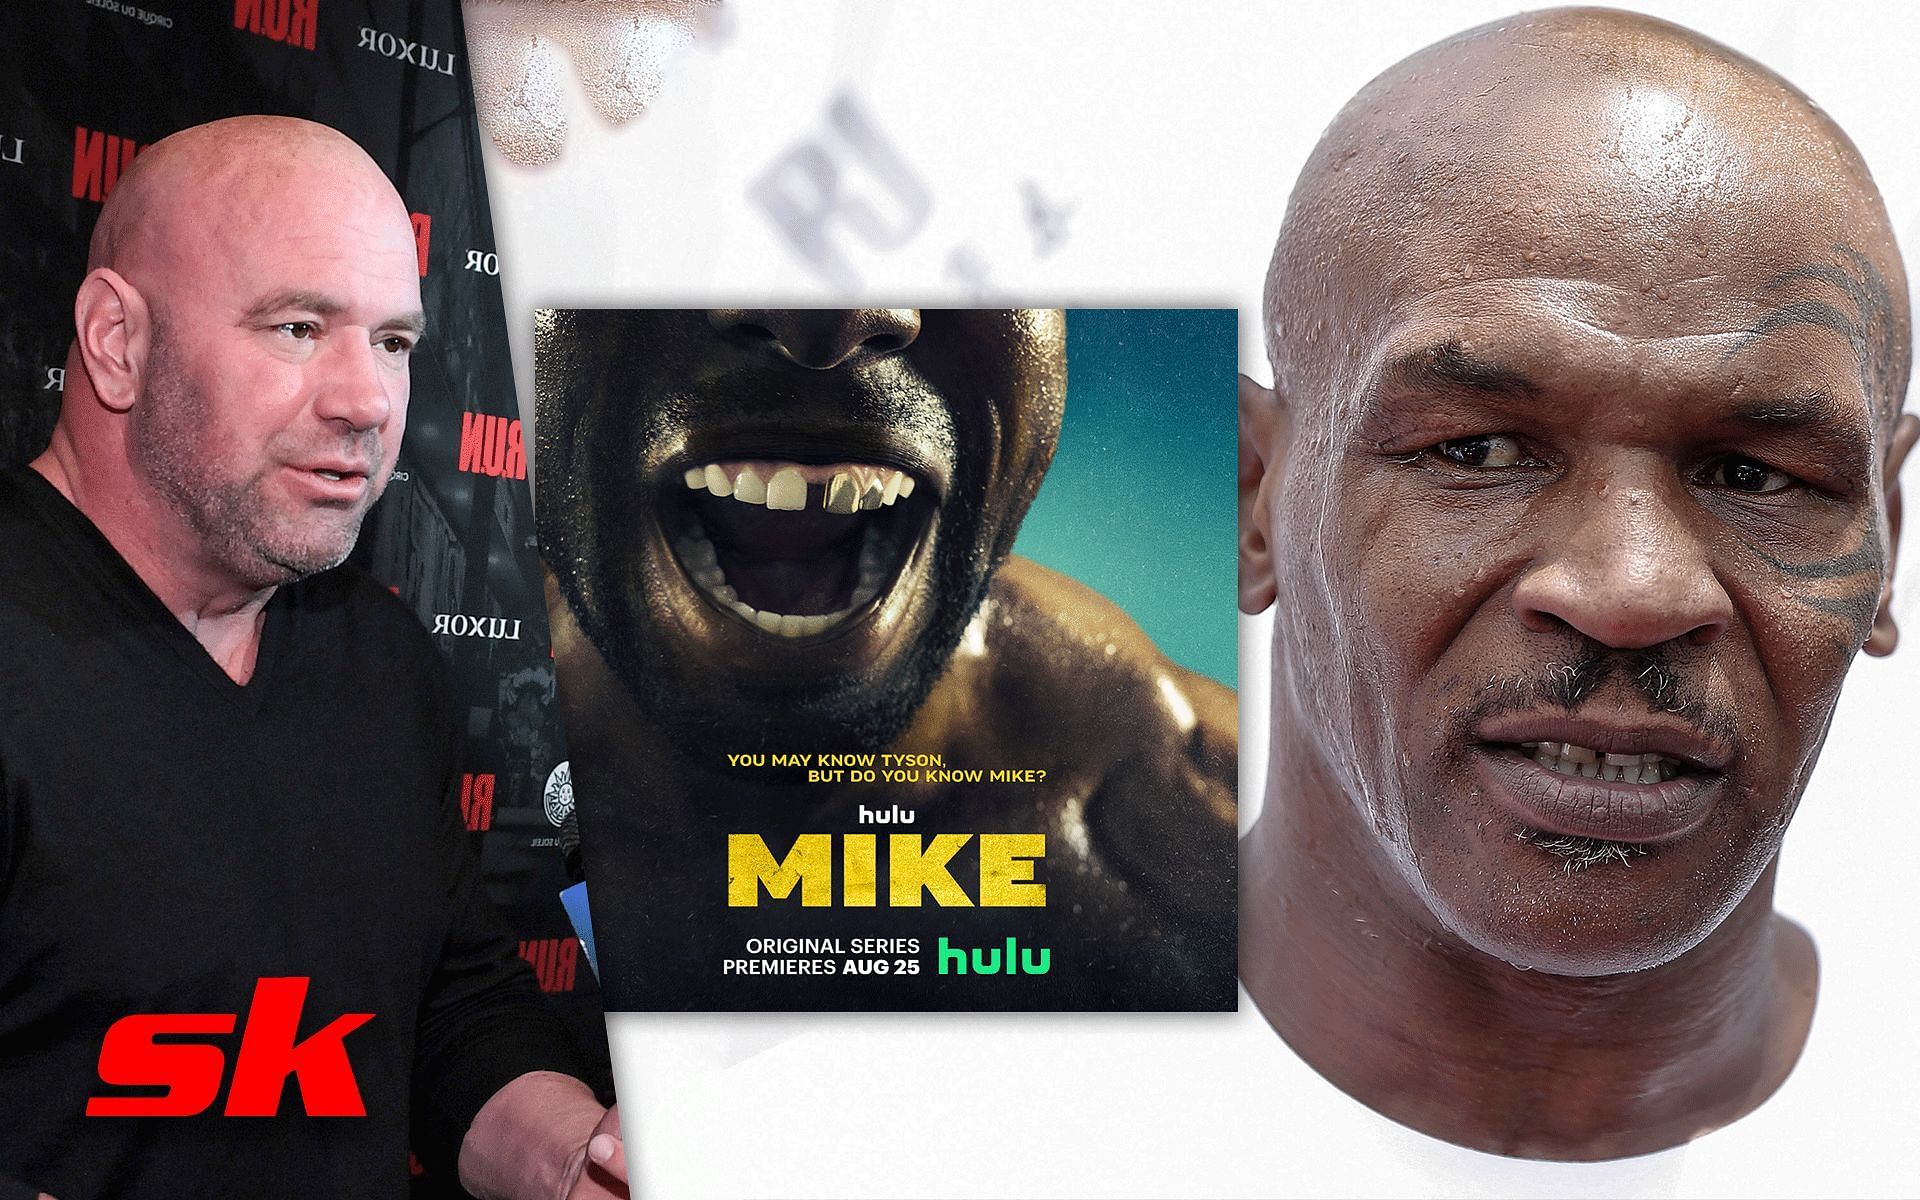 (L to R) Dana White, &#039;Mike&#039; poster (via @hulu on Twitter), Mike Tyson